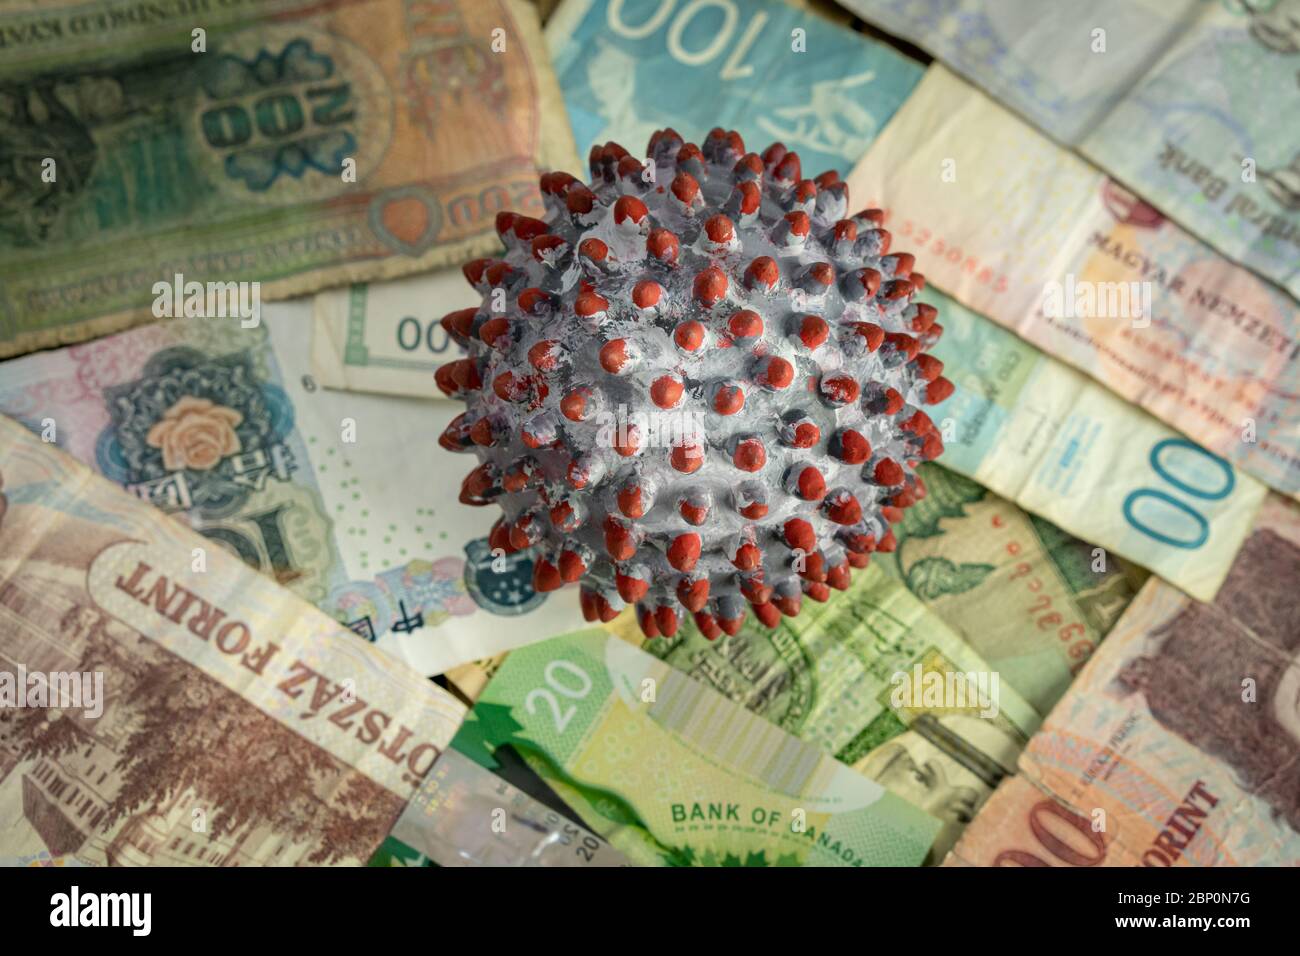 A ball painted like a SARS-CoV-2 virion on the middle of many banknotes from different countries Stock Photo